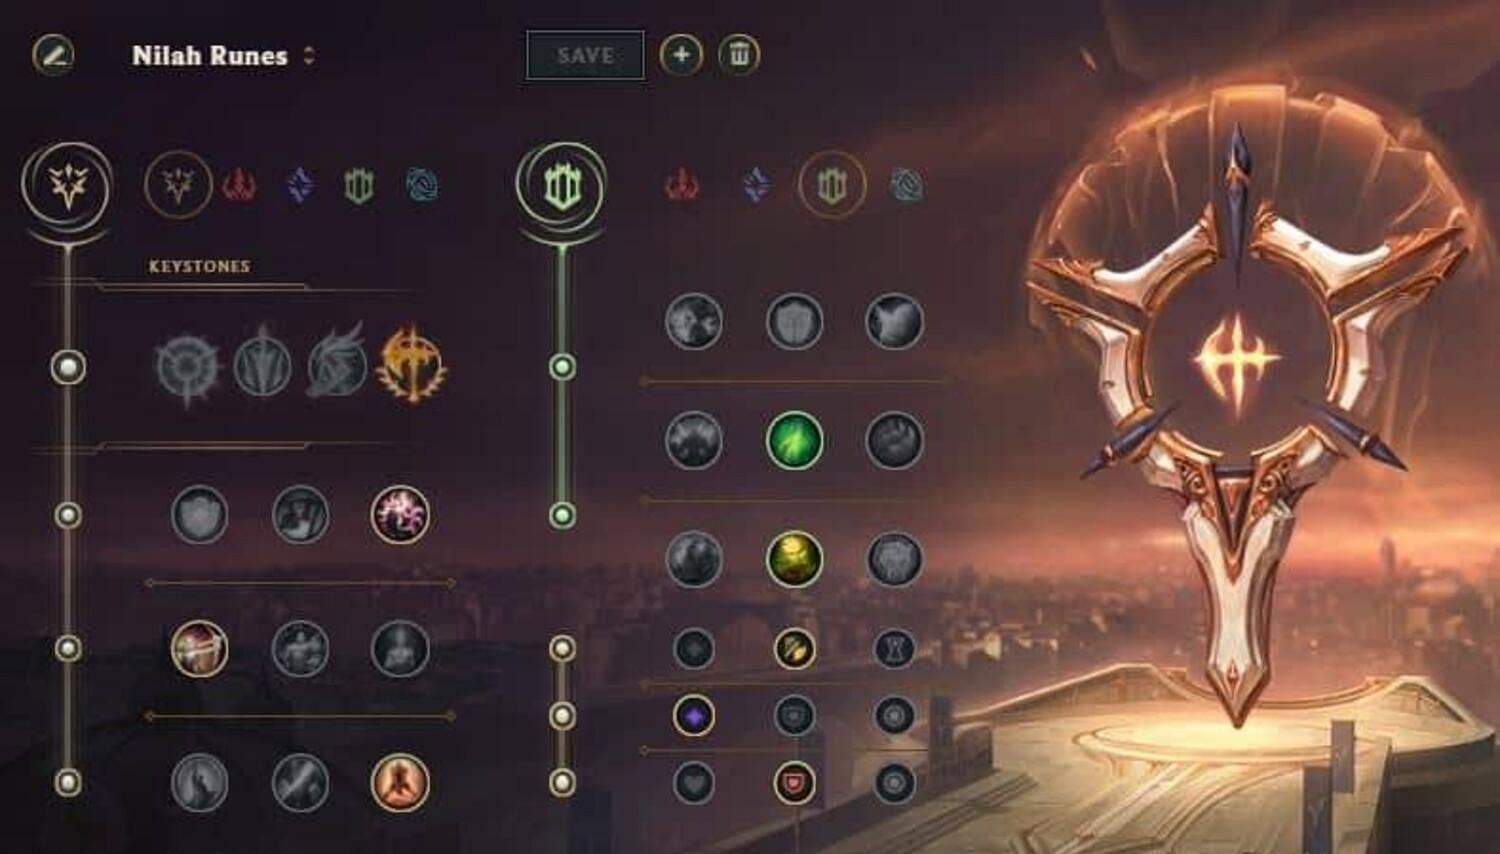 Ideal Rune options for Nilah in League of Legends (Scrrengrab via Riot Games - League of Legends)